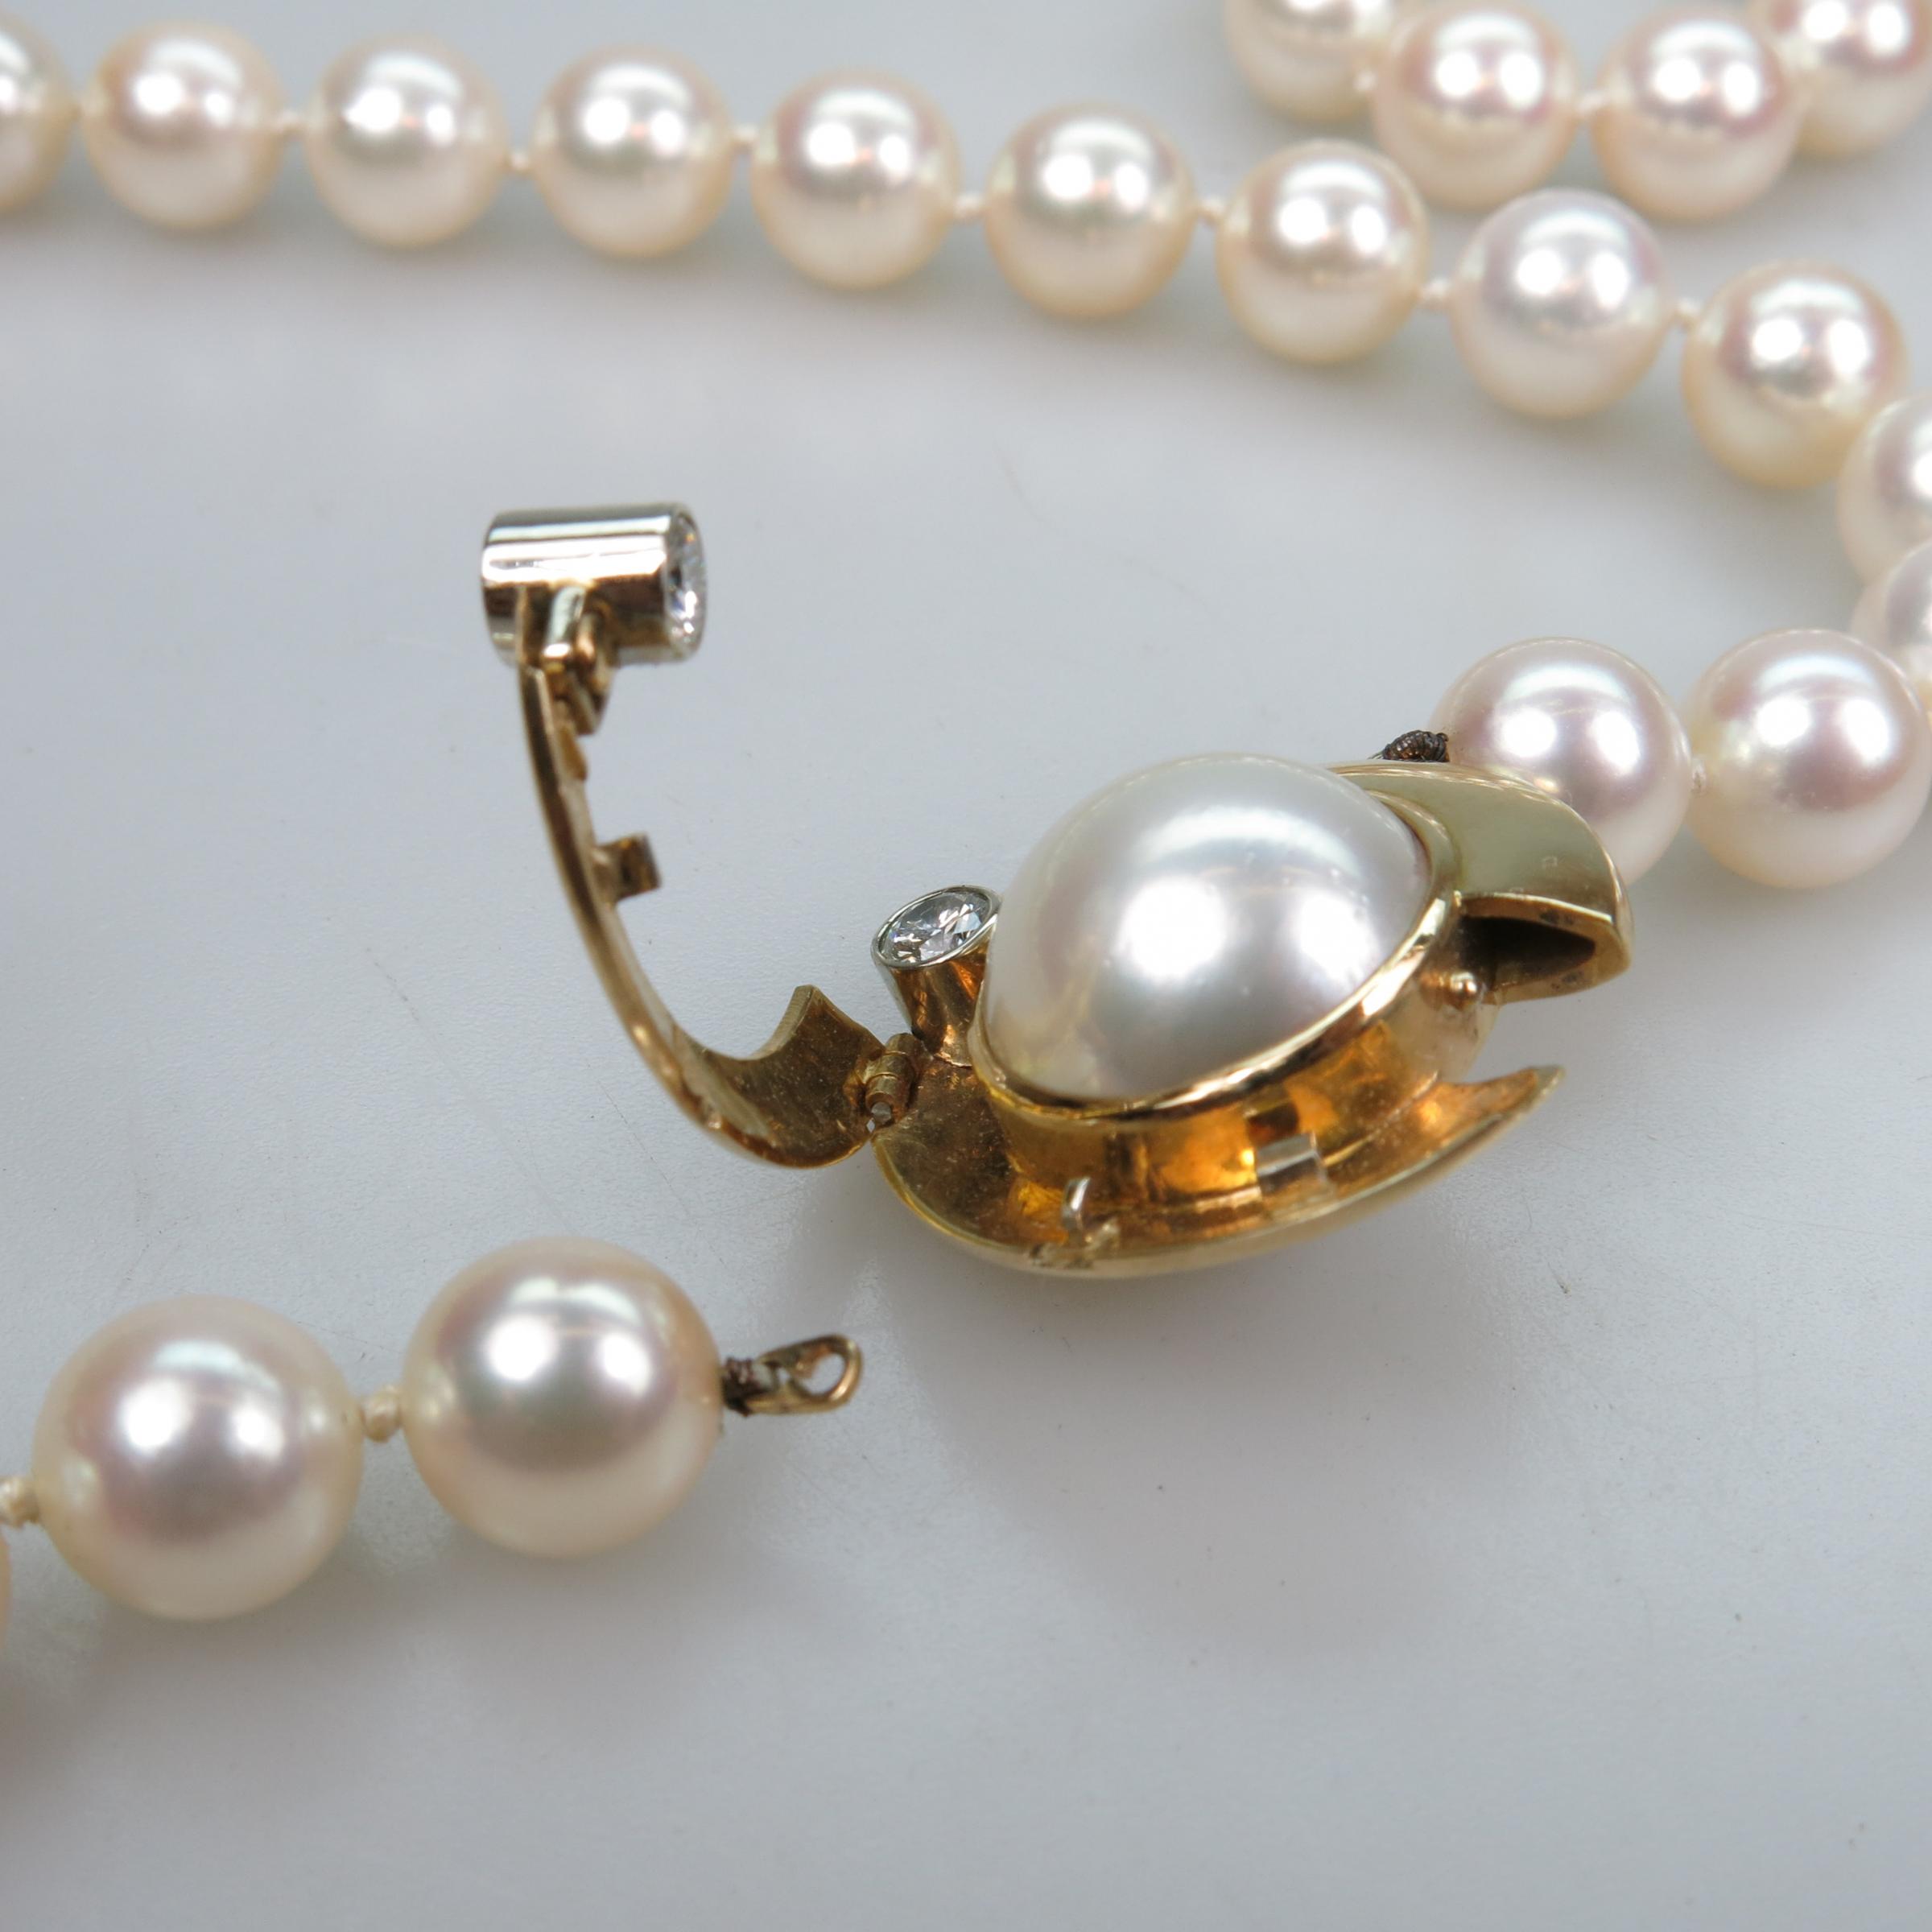 Single Strand Cultured Pearl Necklace